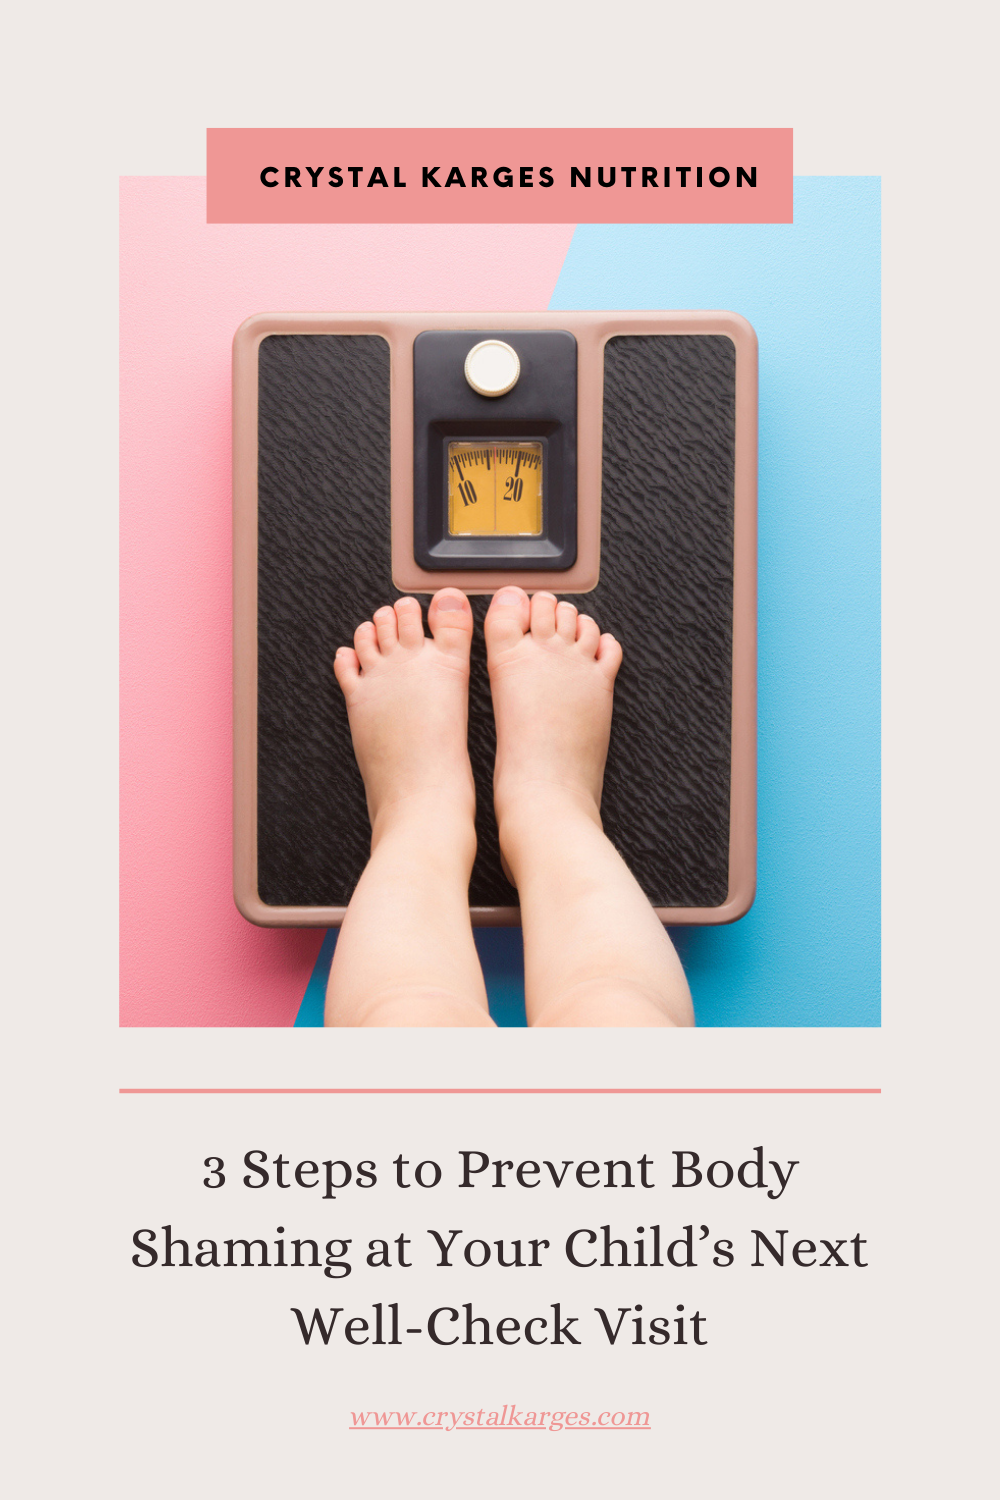 3 Steps to Prevent Body Shaming at Your Child’s Next Well-Check Visit